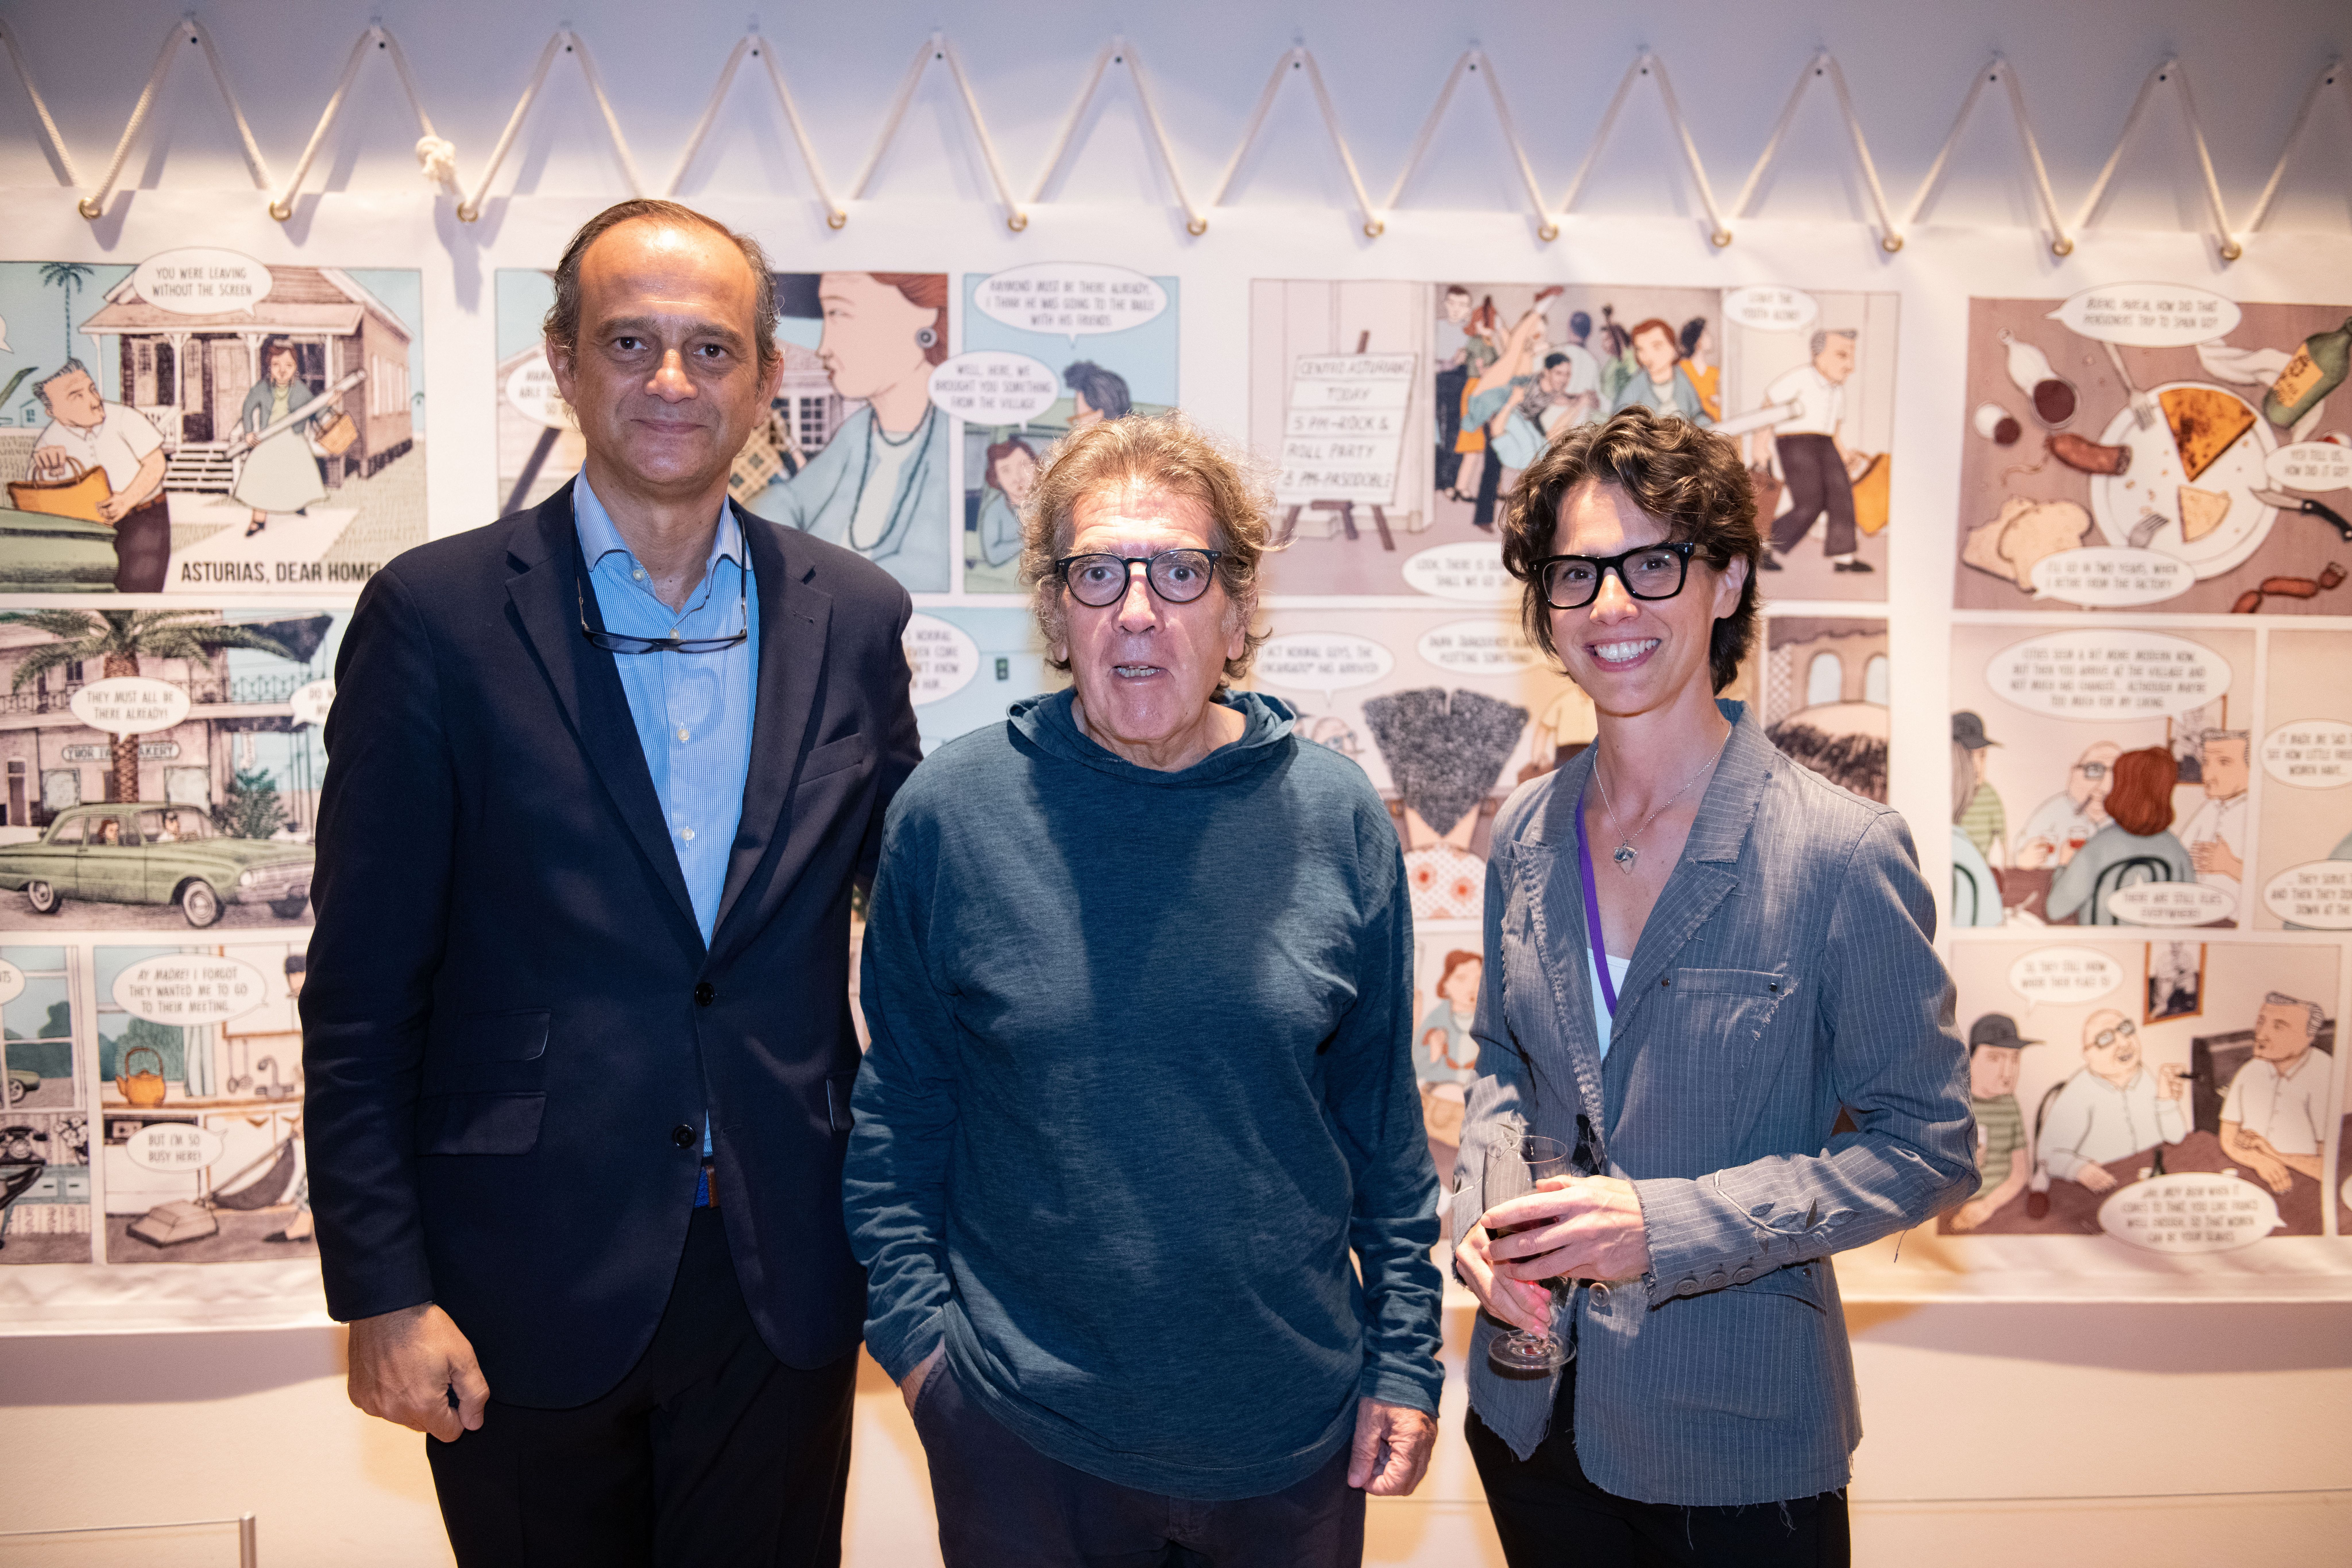 Miguel Albero, Cultural Counselor of the Embassy of Spain in Washington, D.C.; Eduardo Lago, writer and former Director of the Cervantes Institute in New York; and Laura Turégano, KJCC Associate Director. Photo: @Creighton: Courtesy of NYU Photo Bureau